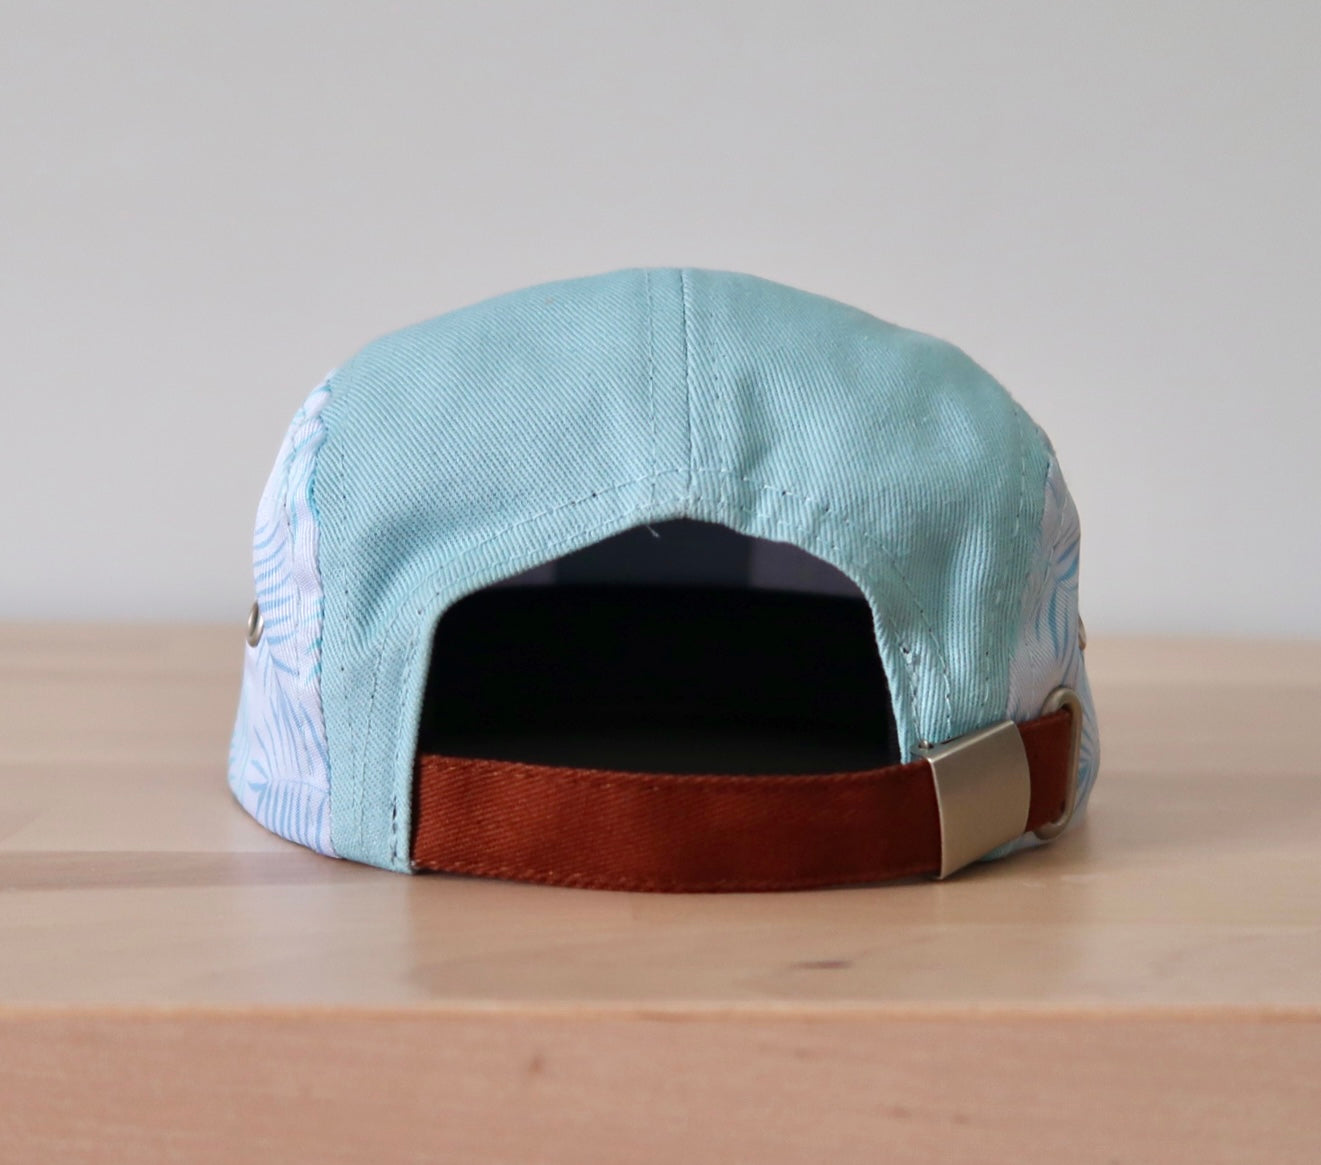 Tropical blue hat featuring aqua beach leaf patterns and a brown adjustable strap